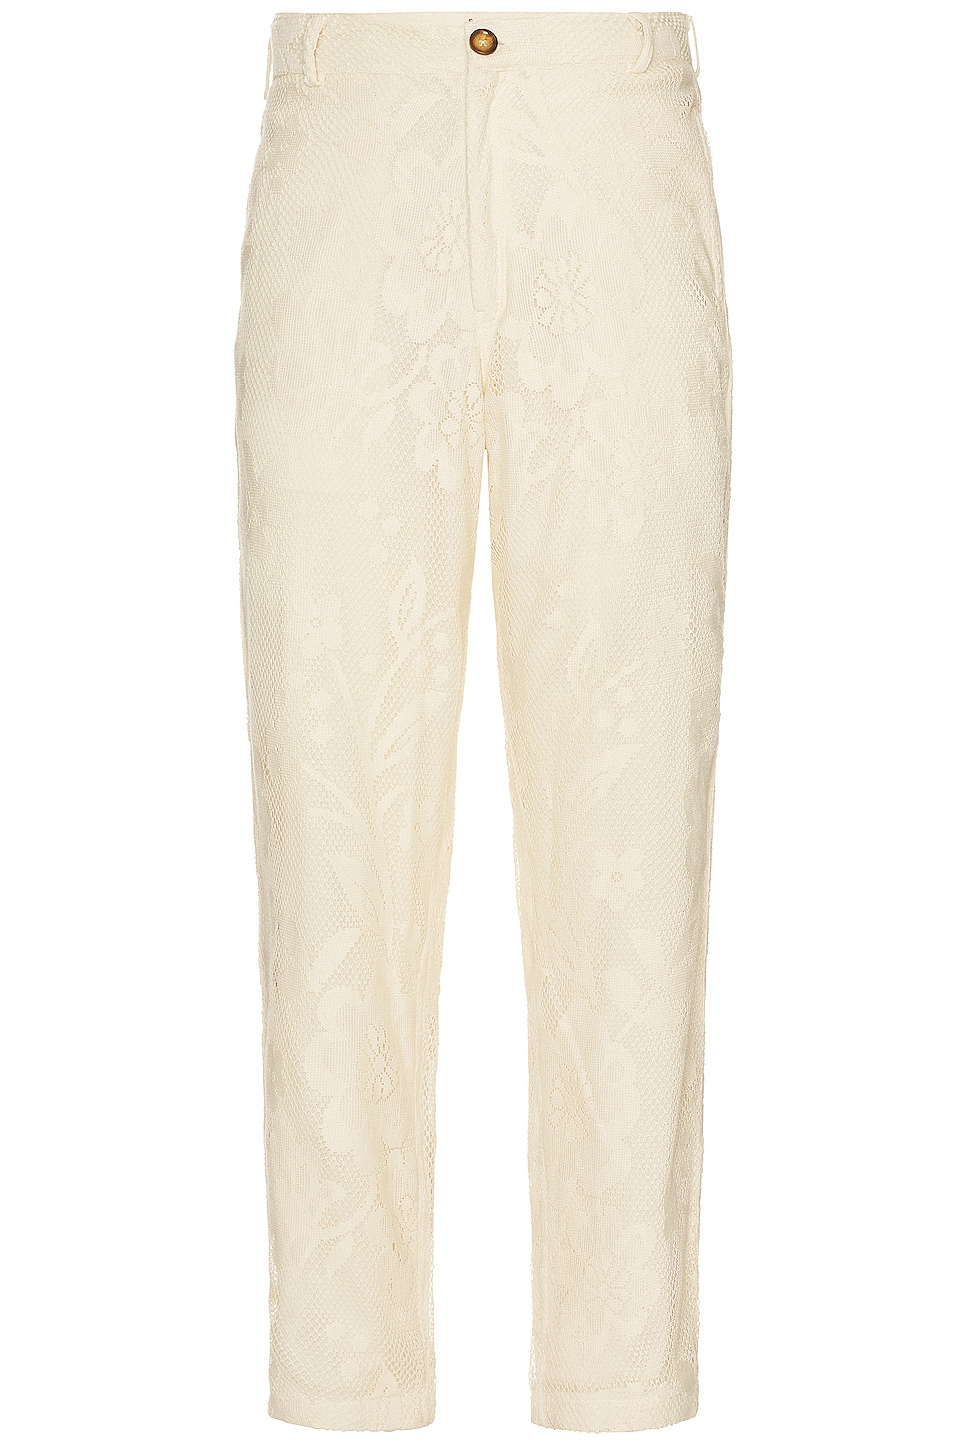 Image 1 of HARAGO Lace Pants in Off White